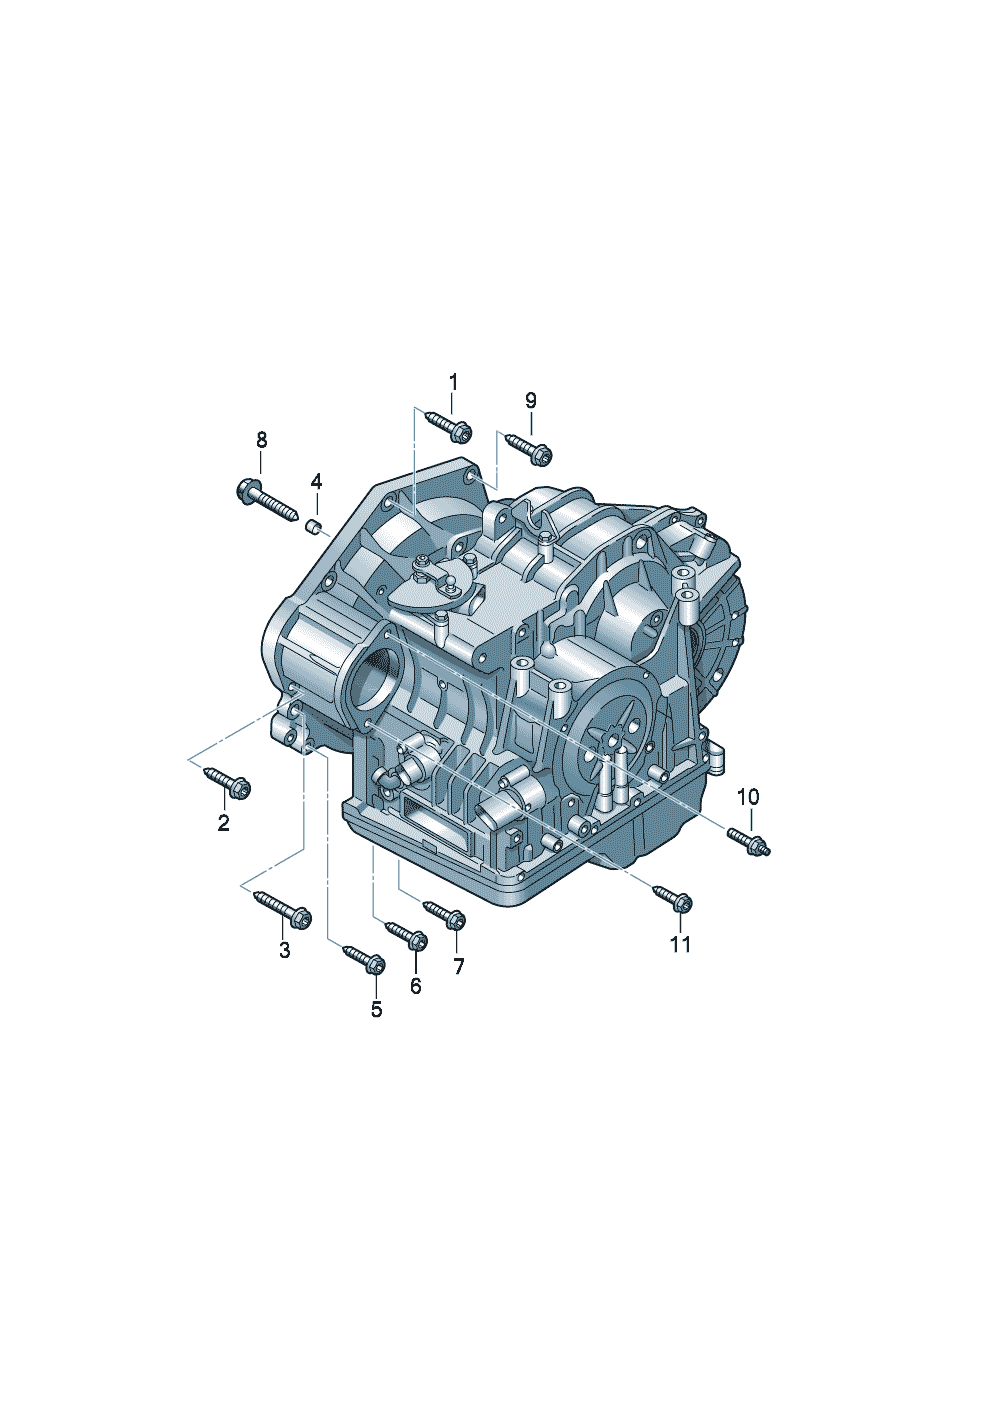 mounting parts for engine and<br>transmission6-speed automatic gearbox  - Audi TT Coupe/Roadster - att